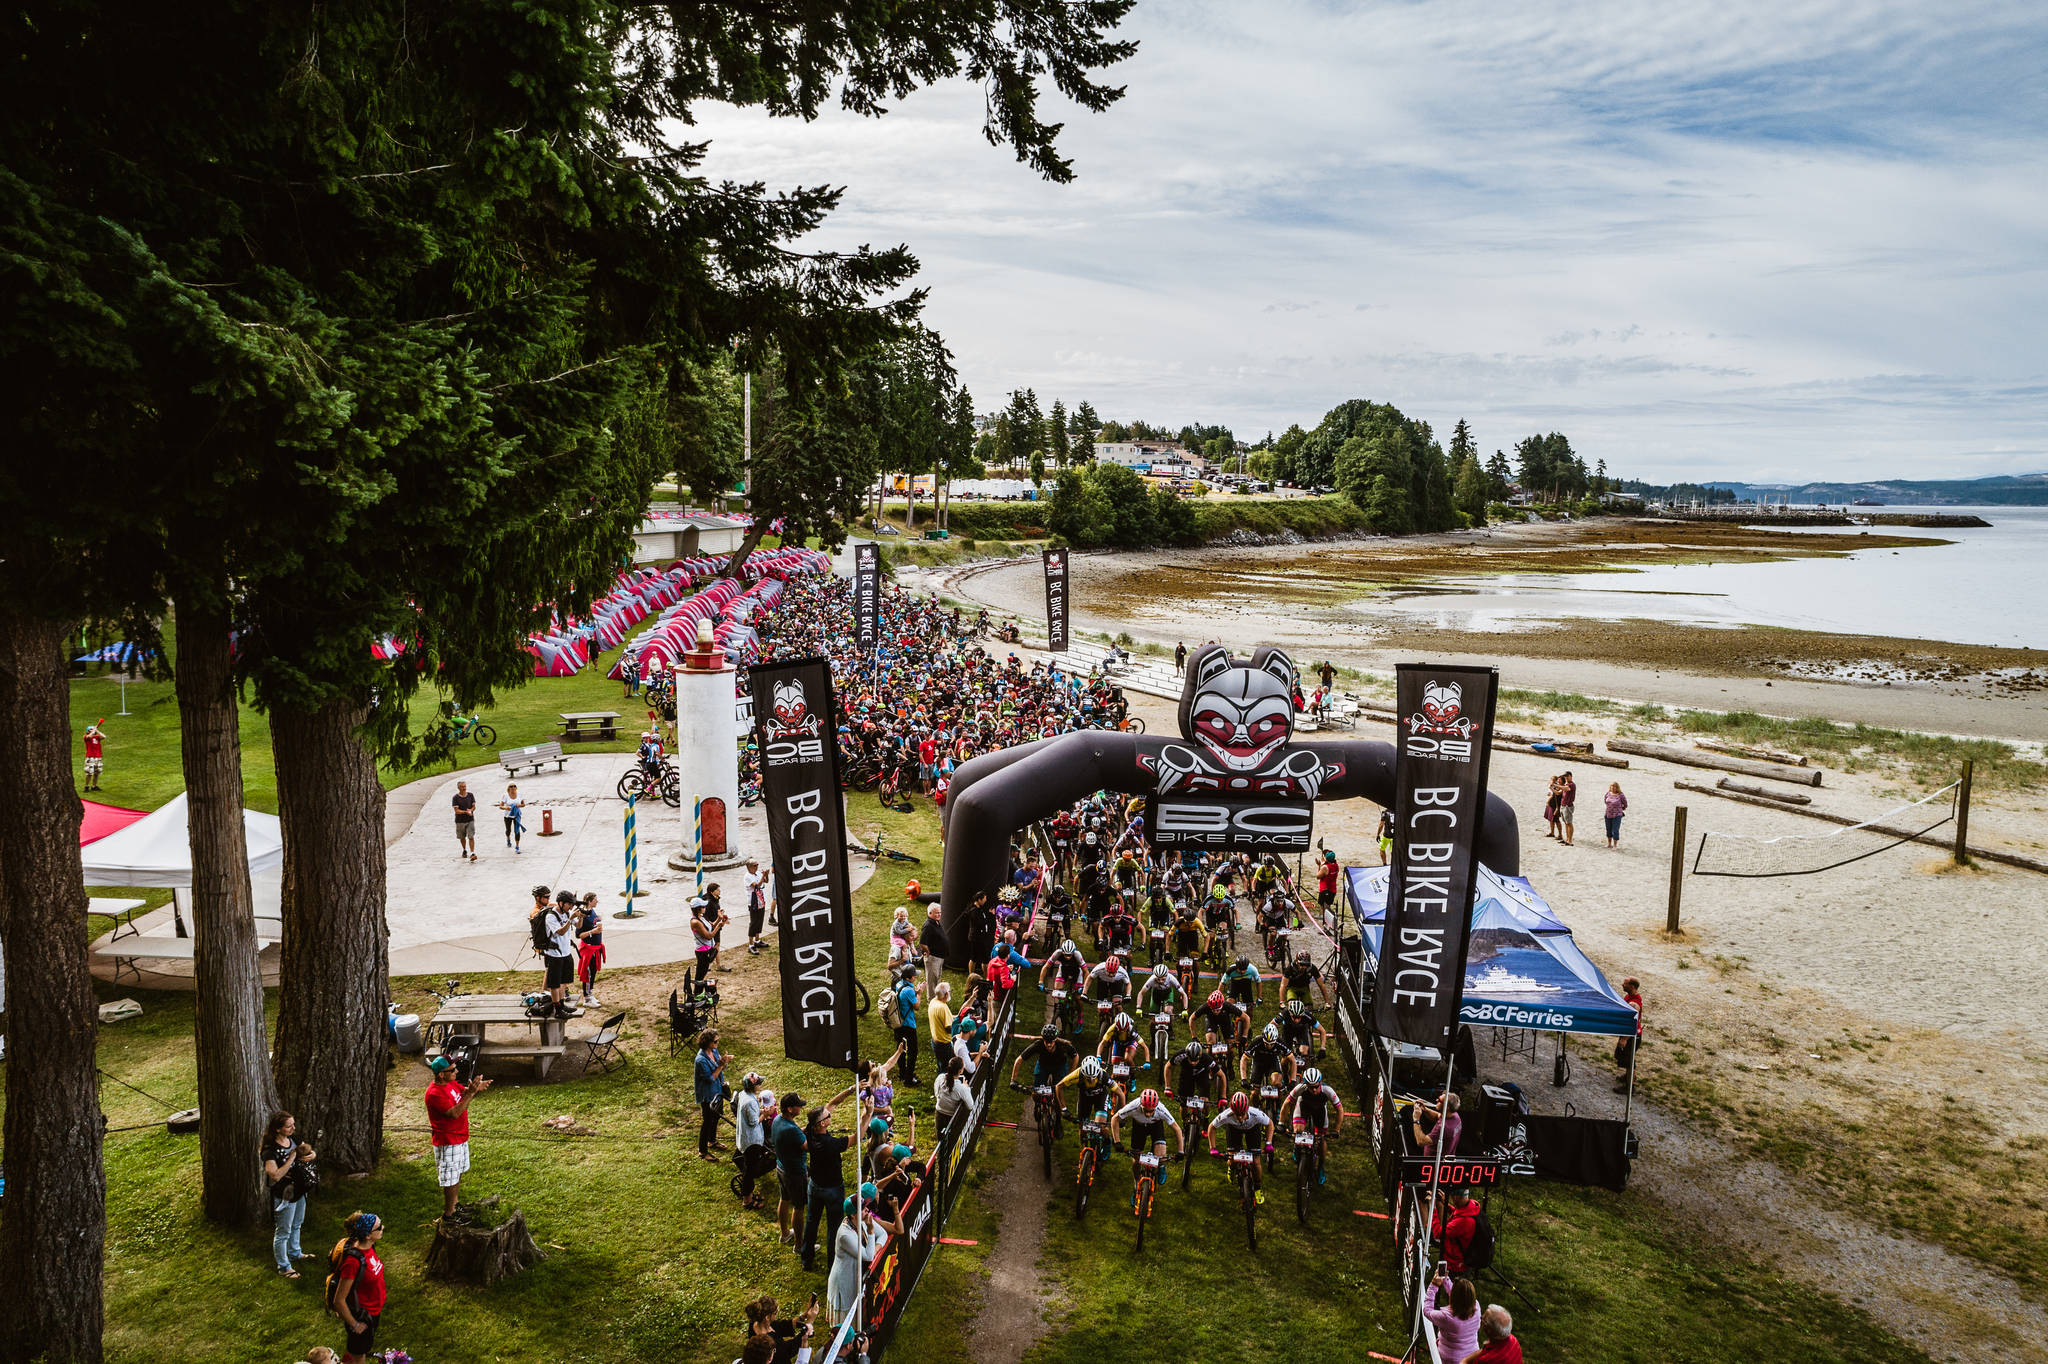 At the starting line of the BC Bike Race near the Powell River, where 600-plus riders look for a fast start. Race organizers staggered the start with six waves. Photo courtesy of Powell Jones